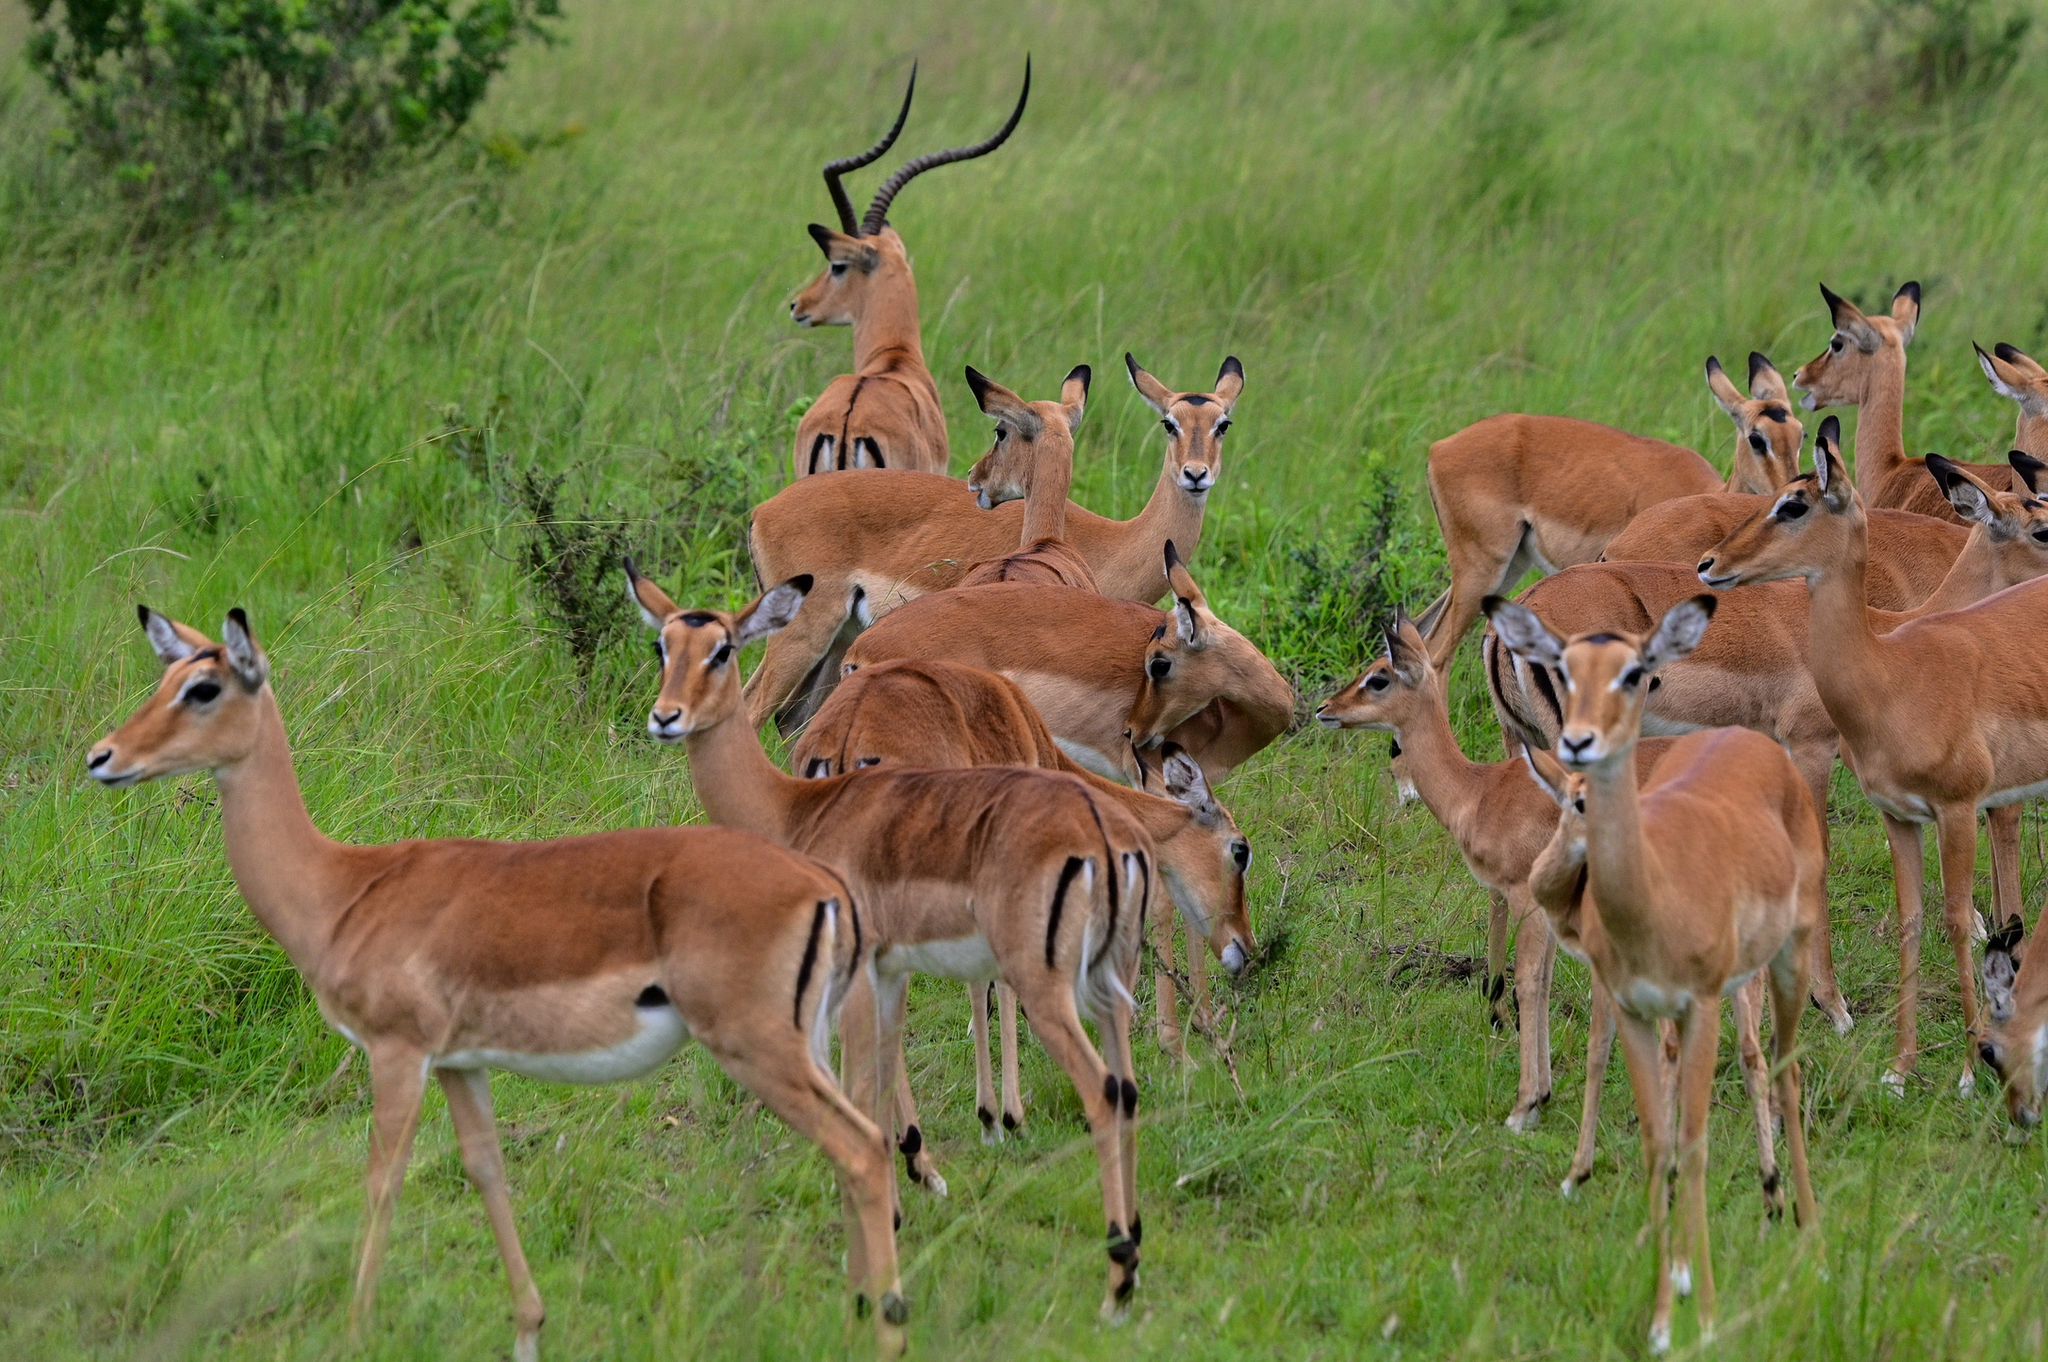 1 Day akagera national park adventure, 1 day tour to akagera, 1 day akagera adventure, 1 day tour in akagera, akagera safari for 1 day, one day tour to akagera, one-day trip to akagera national park, one-day safari in akagera park, one-day adventure in akagera, akagera one-day adventure, akagera tour for 1 day, akagera game drive 1 day